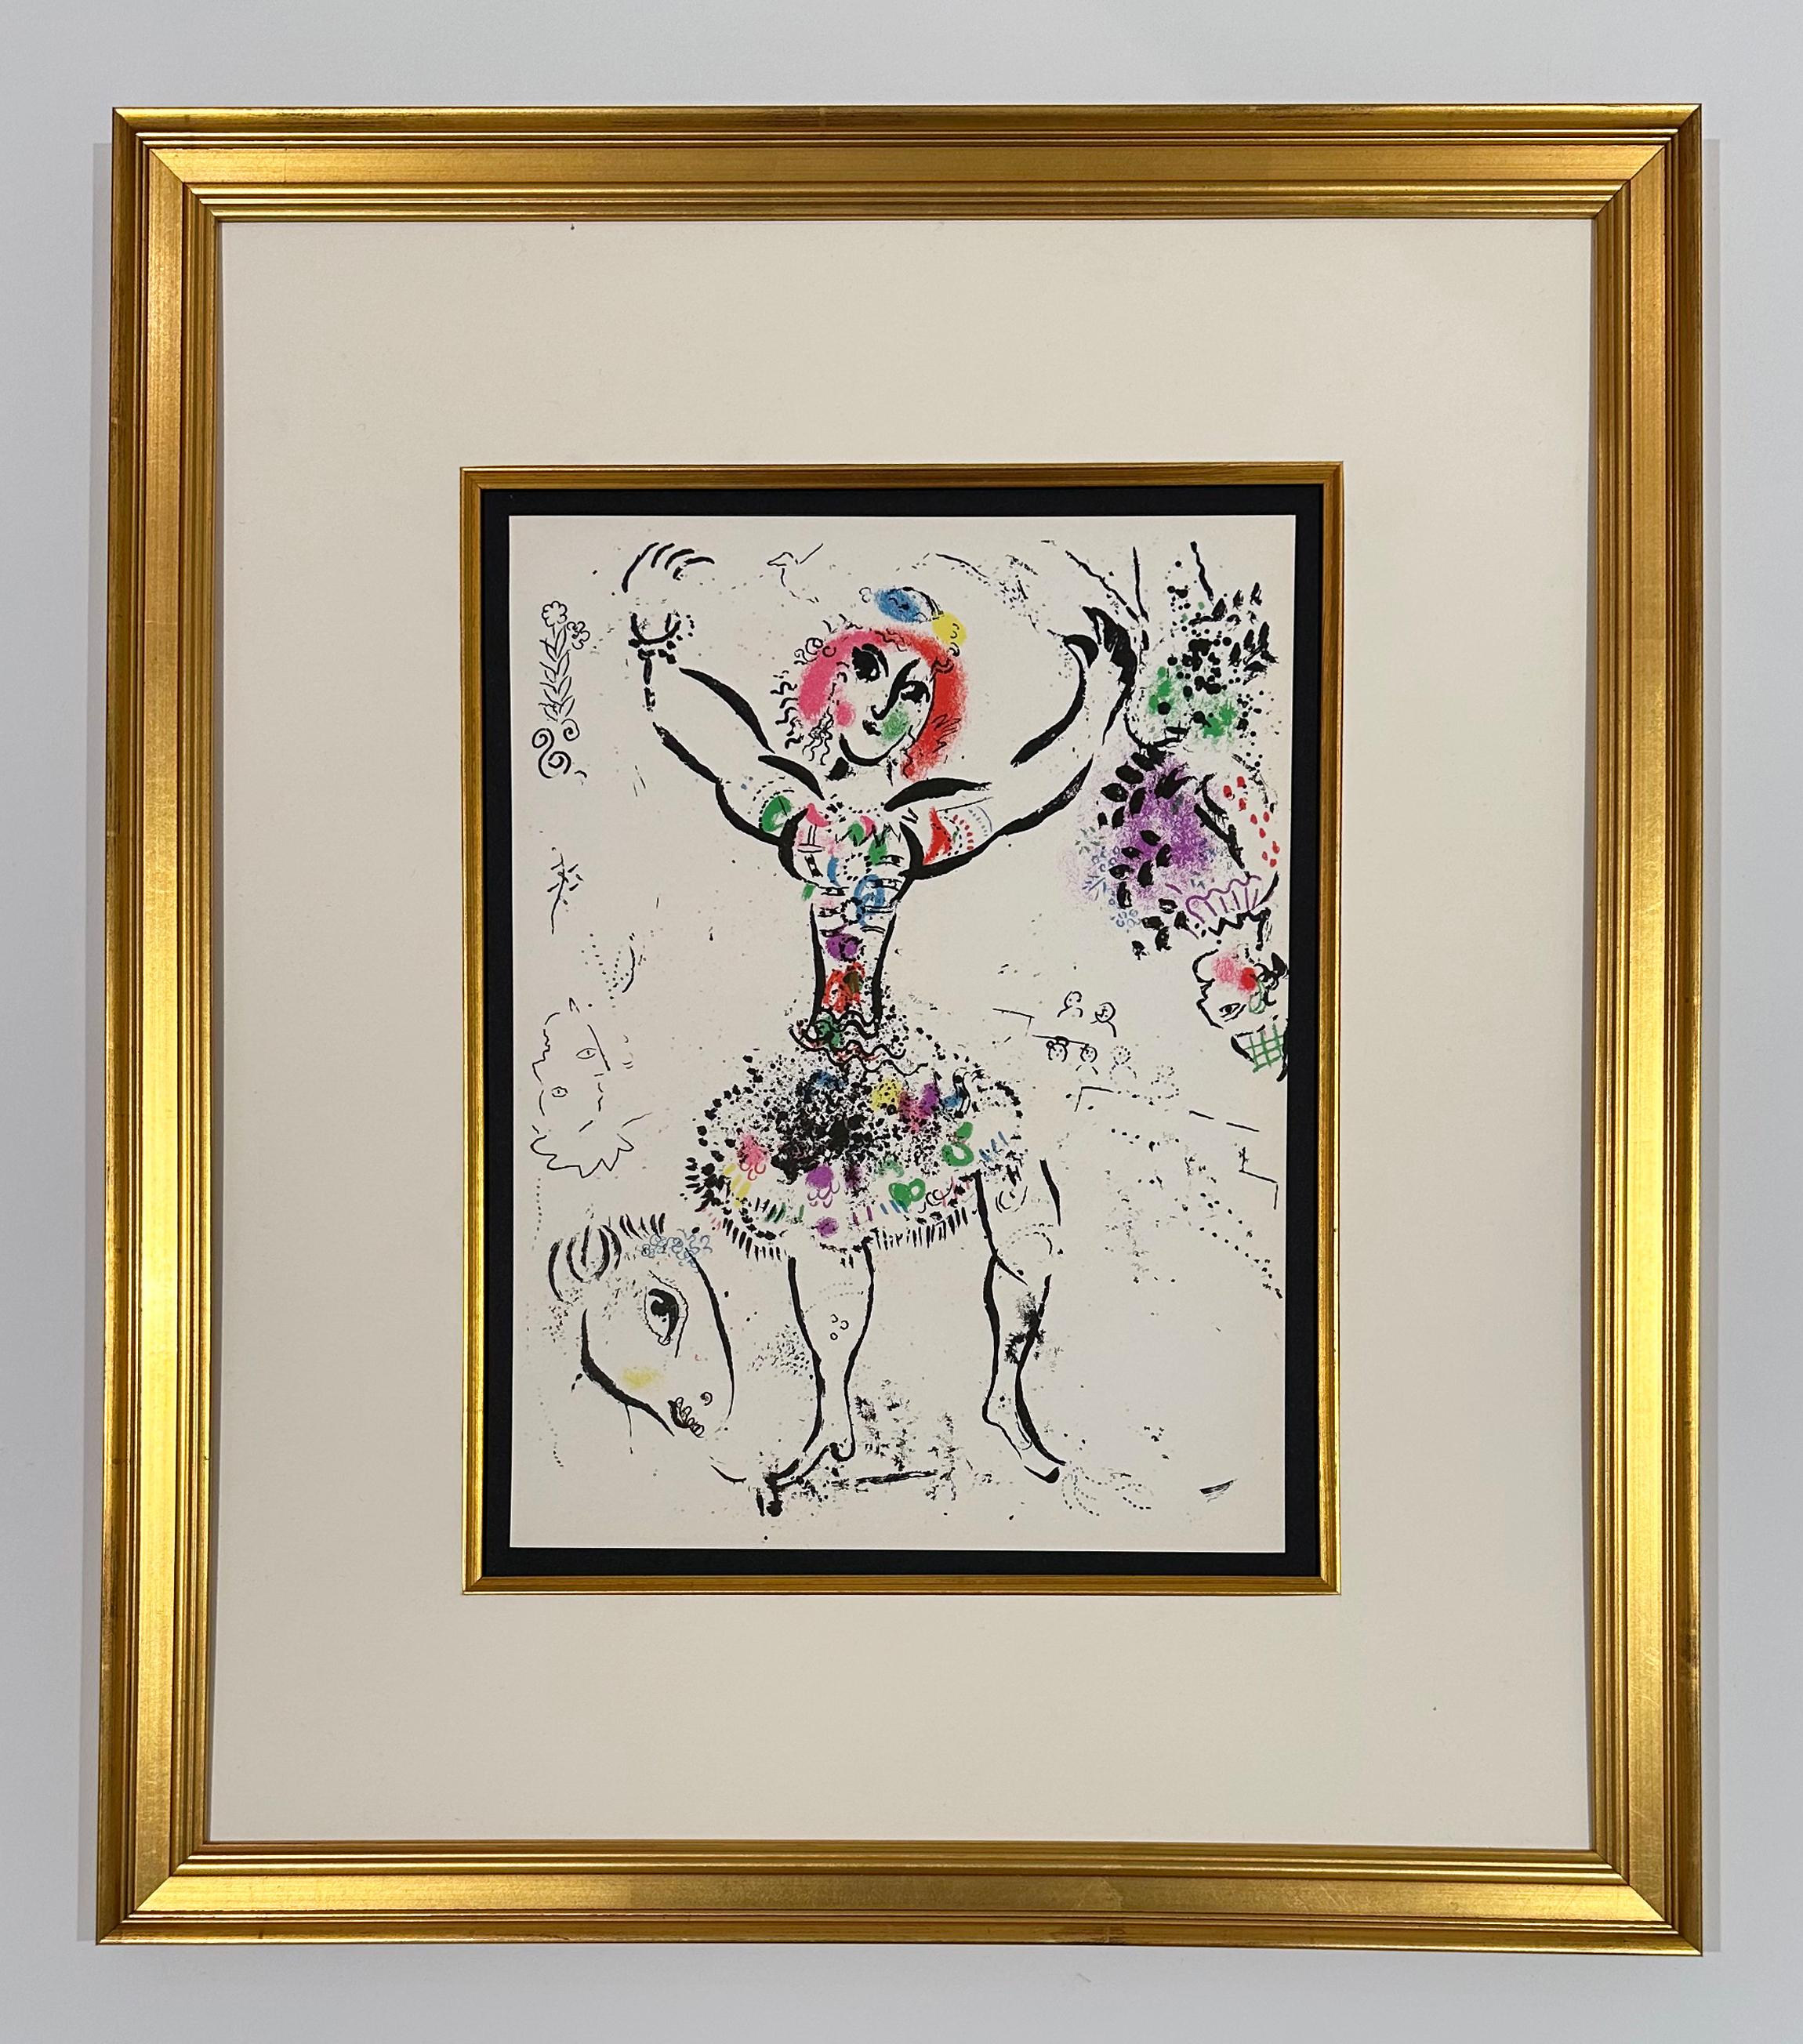 Woman Juggler, from 1960 Mourlot Lithographe I - Print by Marc Chagall